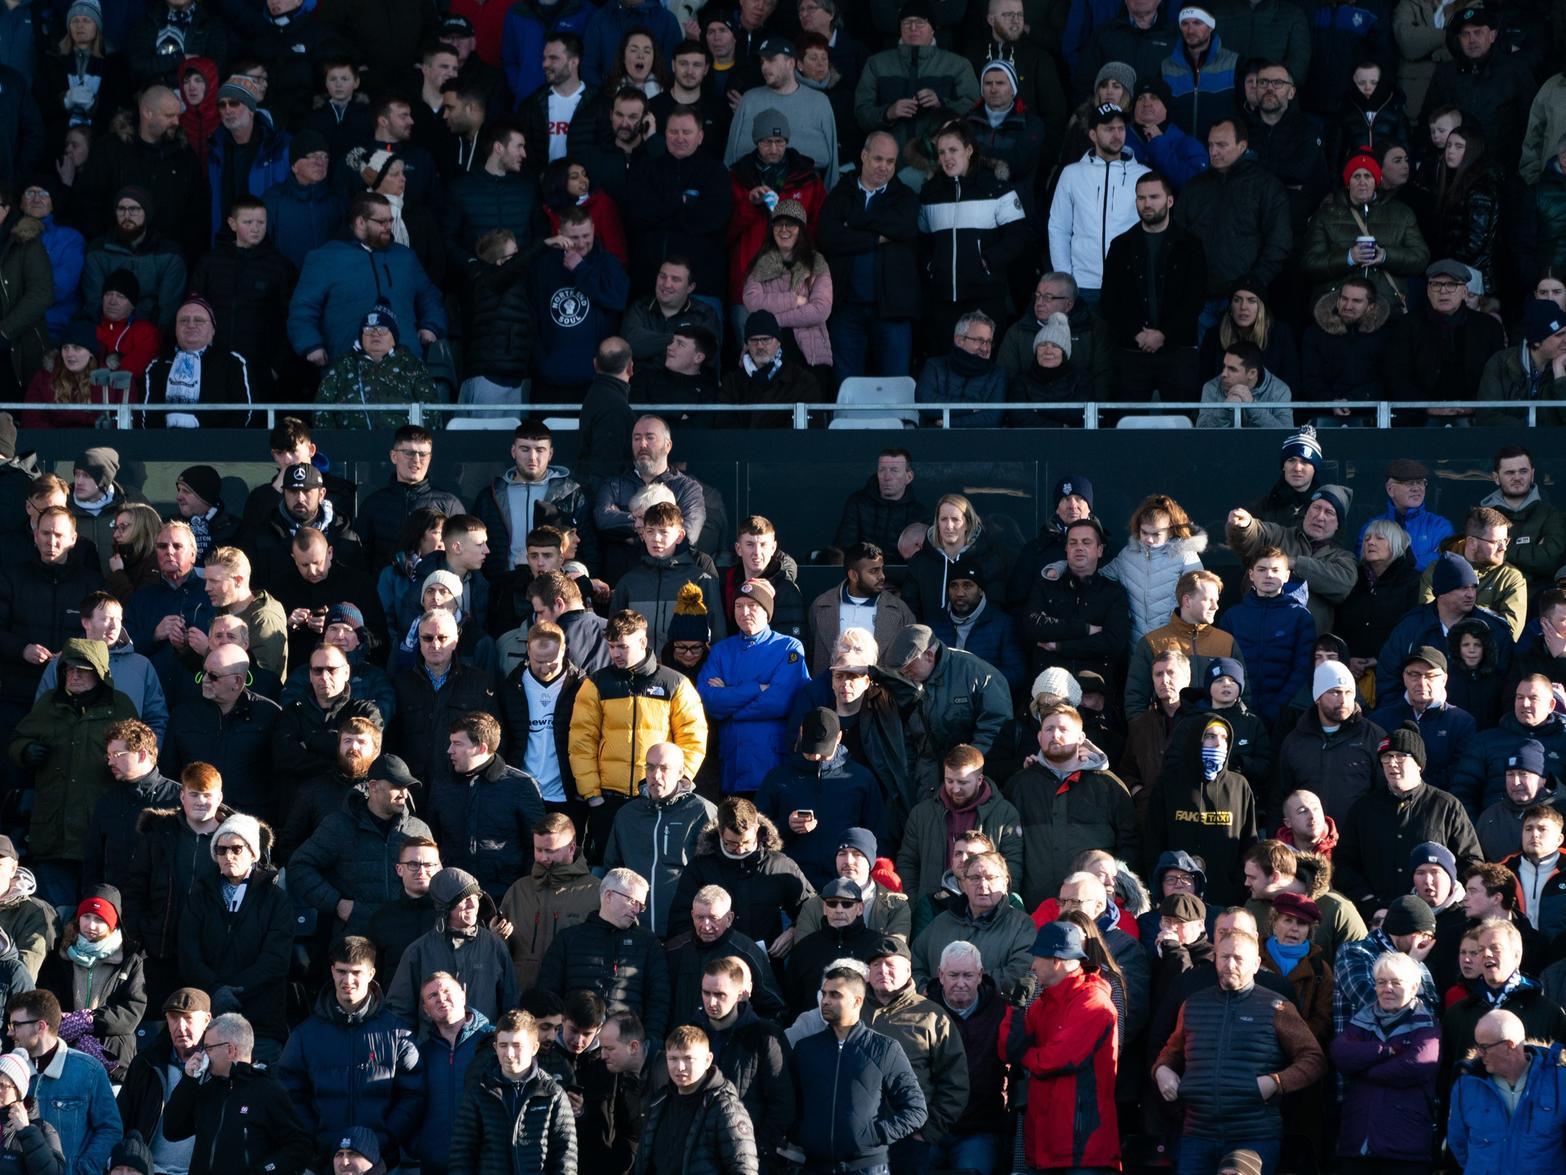 North End fans show their numbers as almost 2,000 made their way to Fulham.